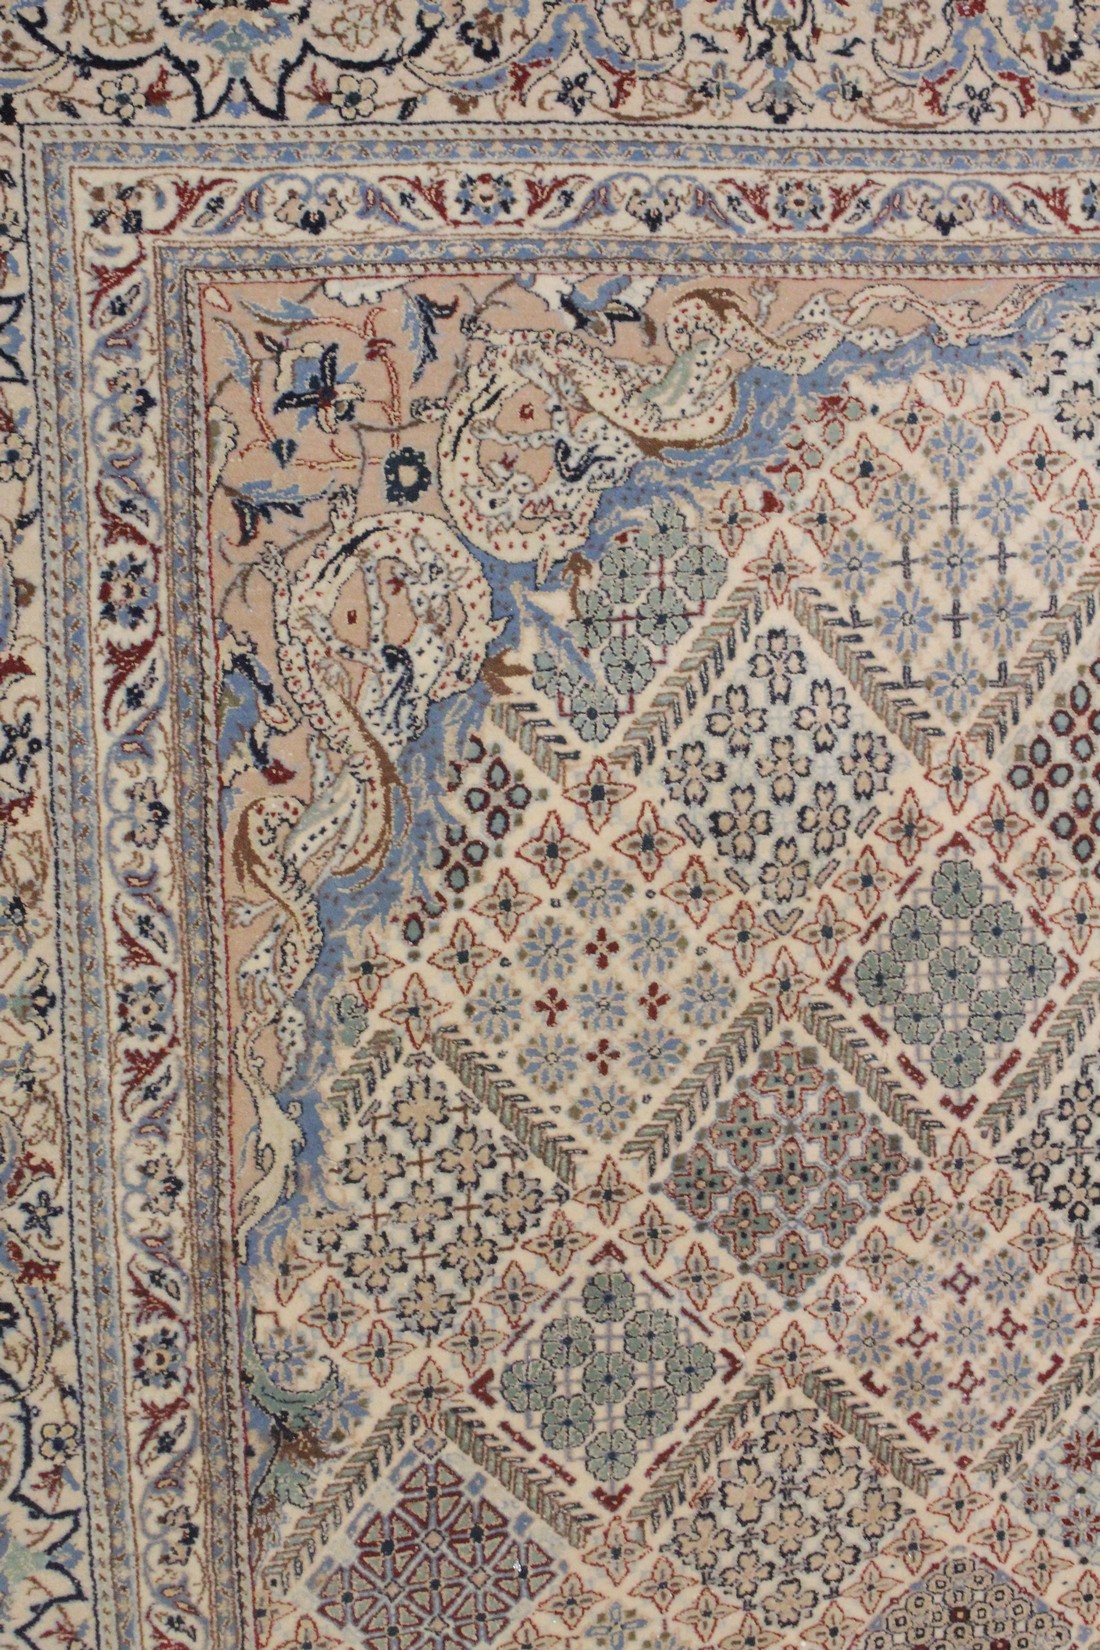 A GOOD PERSIAN NAIRN CARPET beige ground with stylised animals and floral design. 8ft 10ins x 6ft - Image 2 of 7